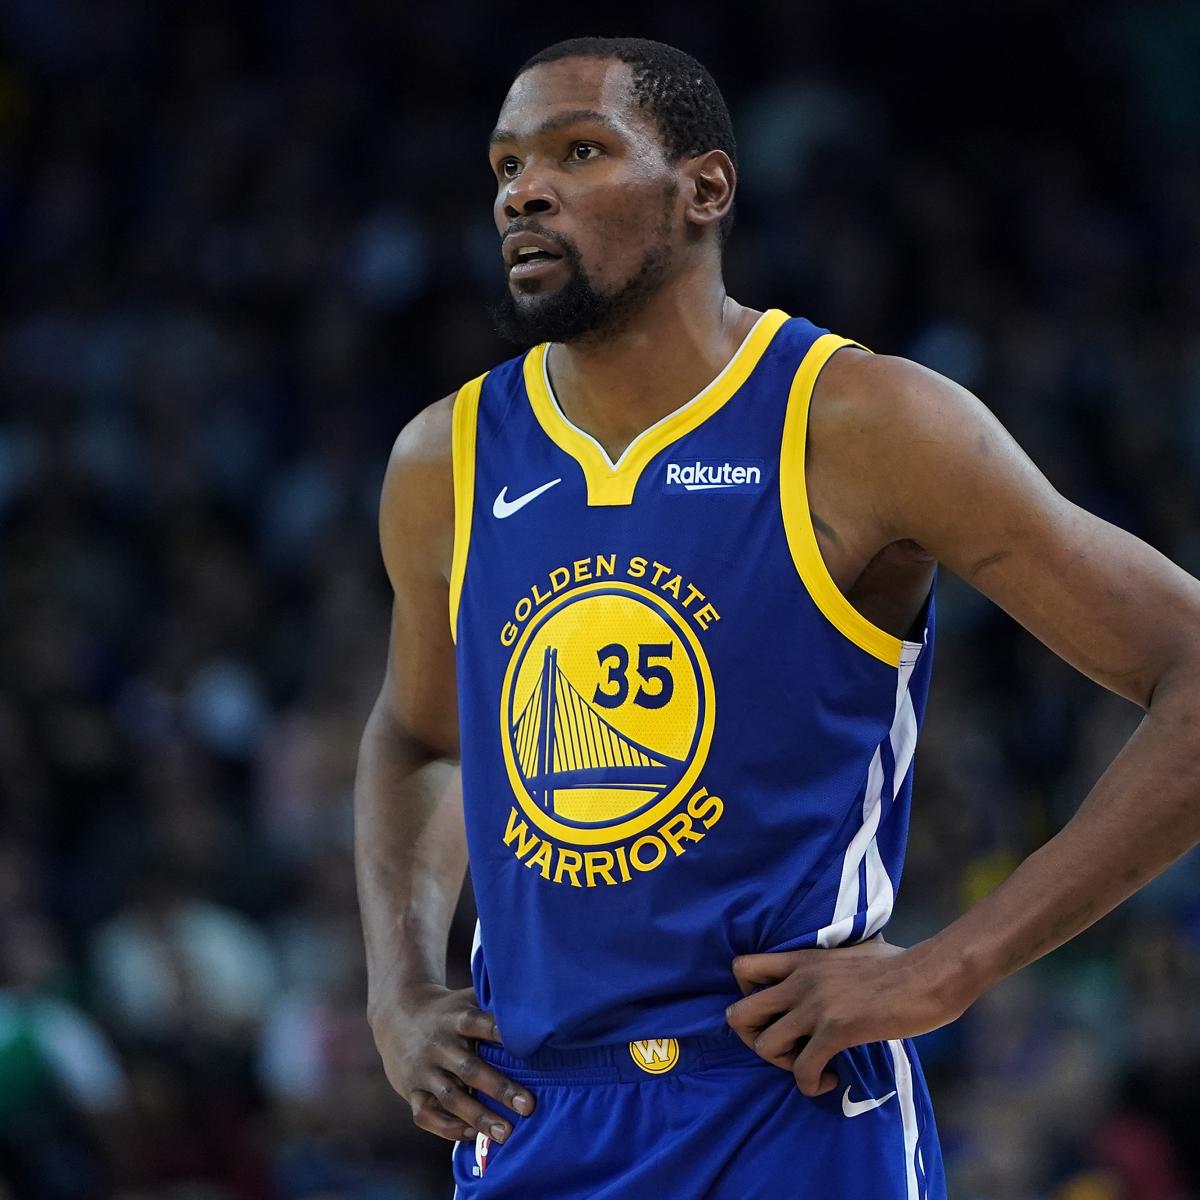 Kevin Durant Won't Play vs. Rockets After Suffering Ankle Injury